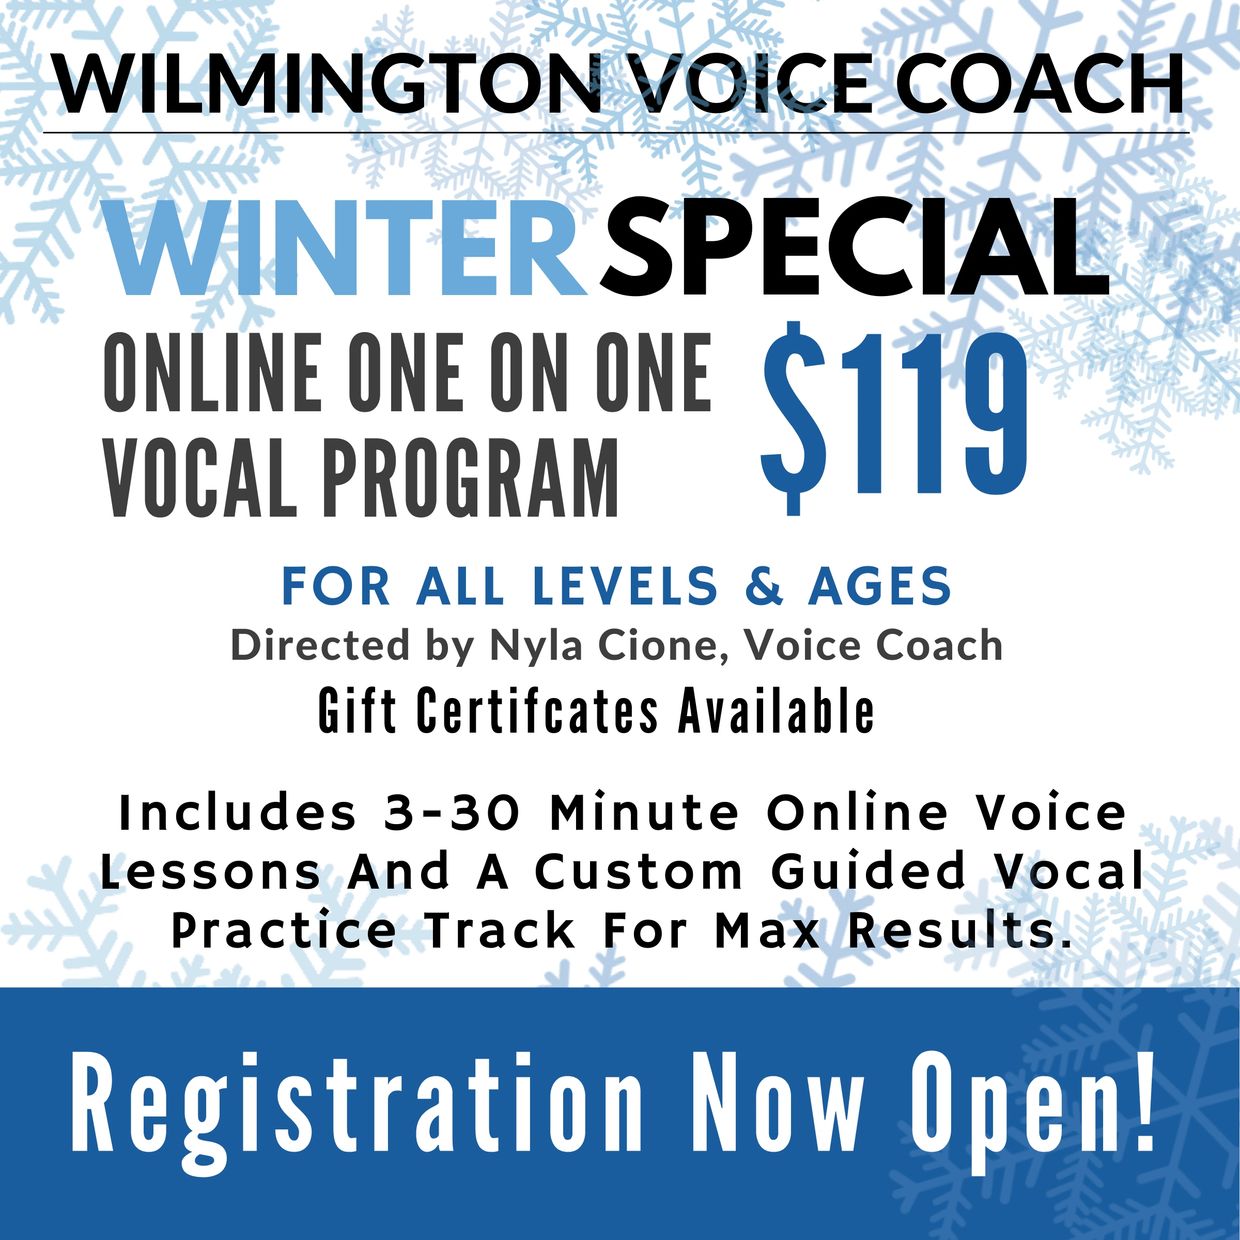 Winter Special for Online Voice Lessons for Kids and Adults, Wilmington, NC. Virtual Voice Lessons.